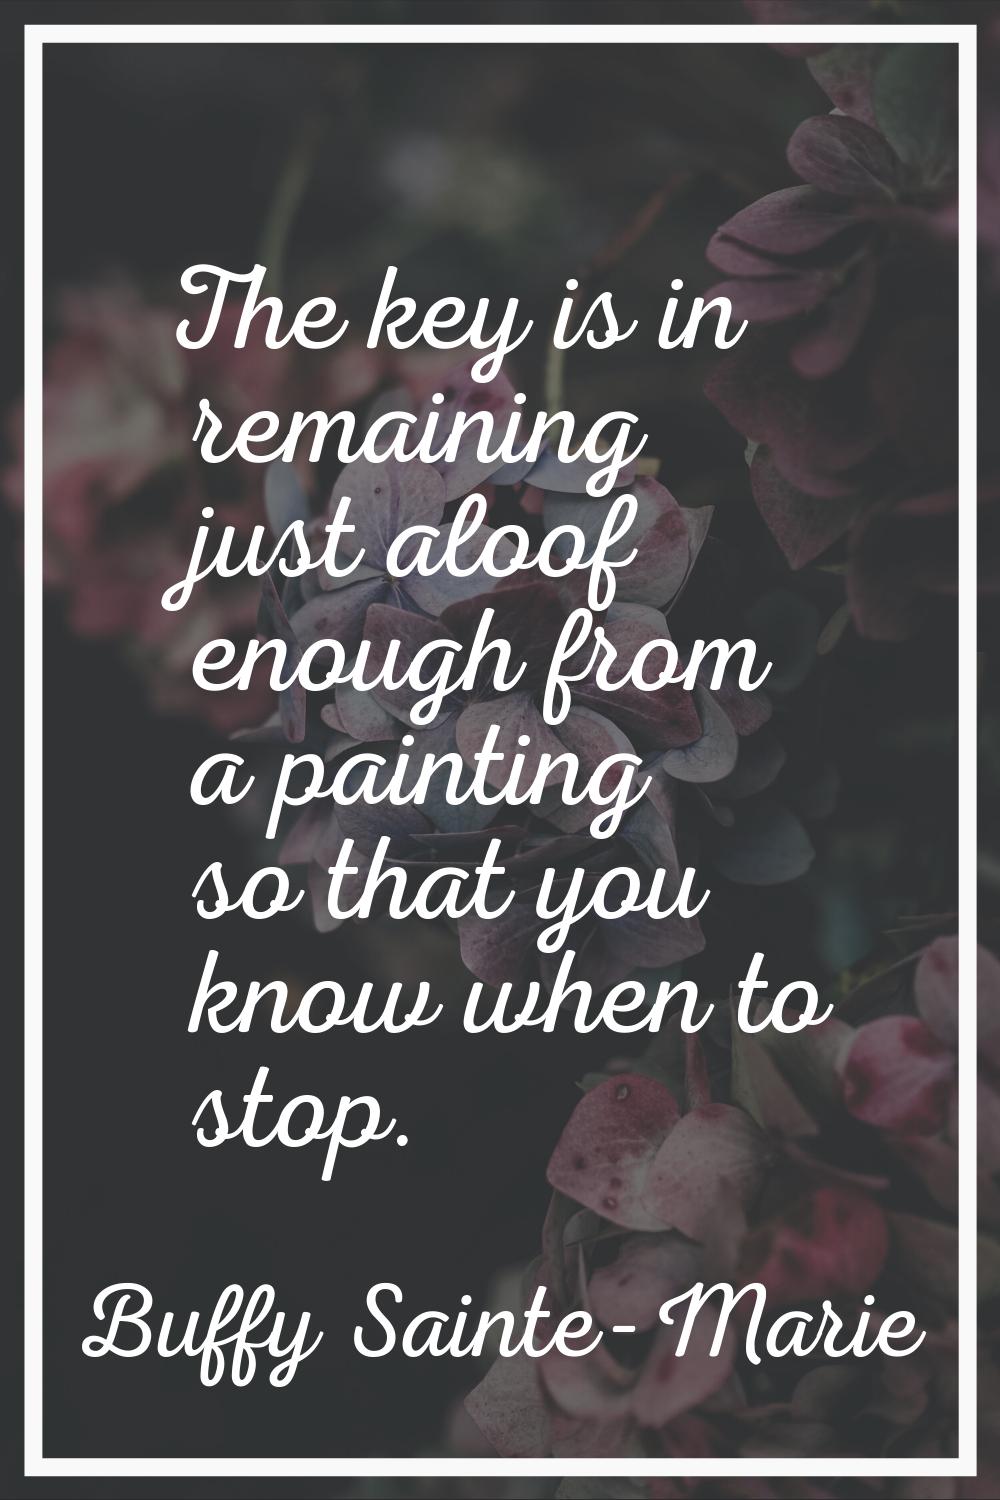 The key is in remaining just aloof enough from a painting so that you know when to stop.